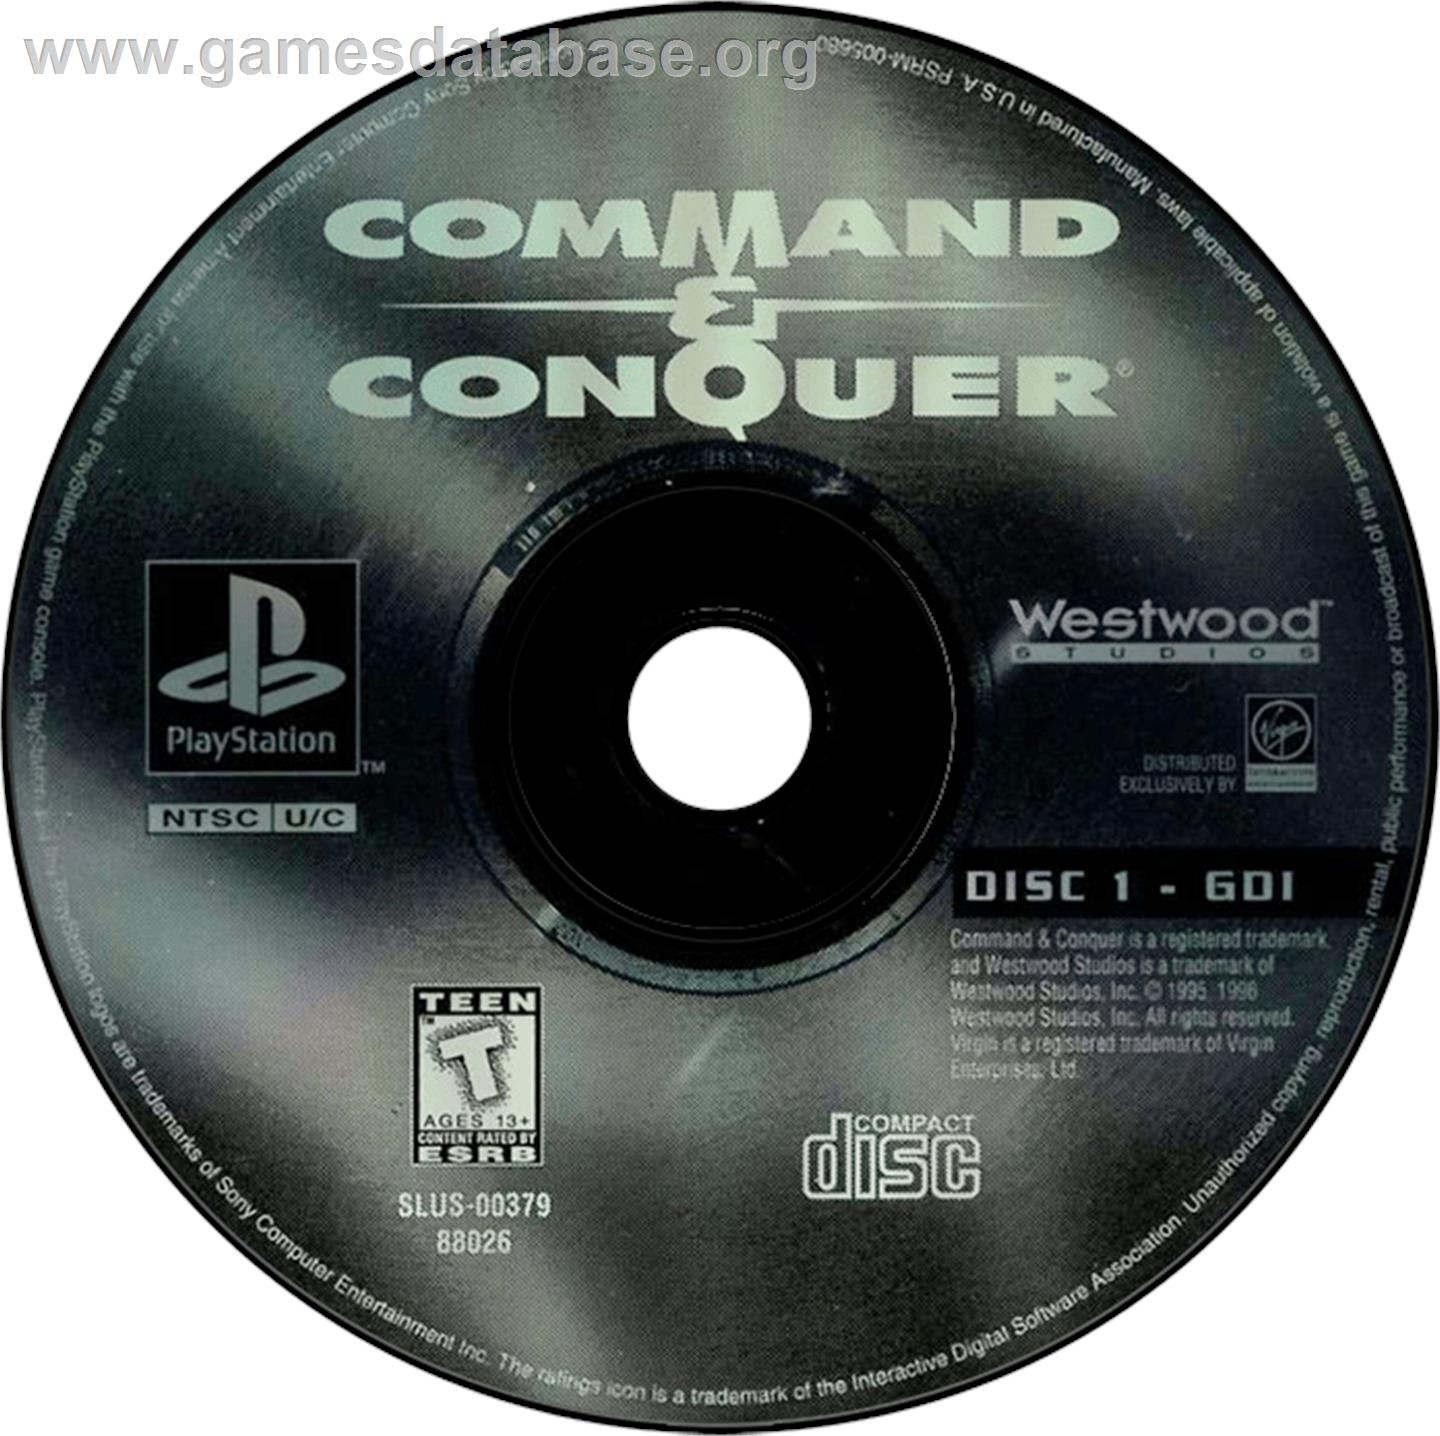 Command & Conquer: Red Alert - Sony Playstation - Artwork - Disc